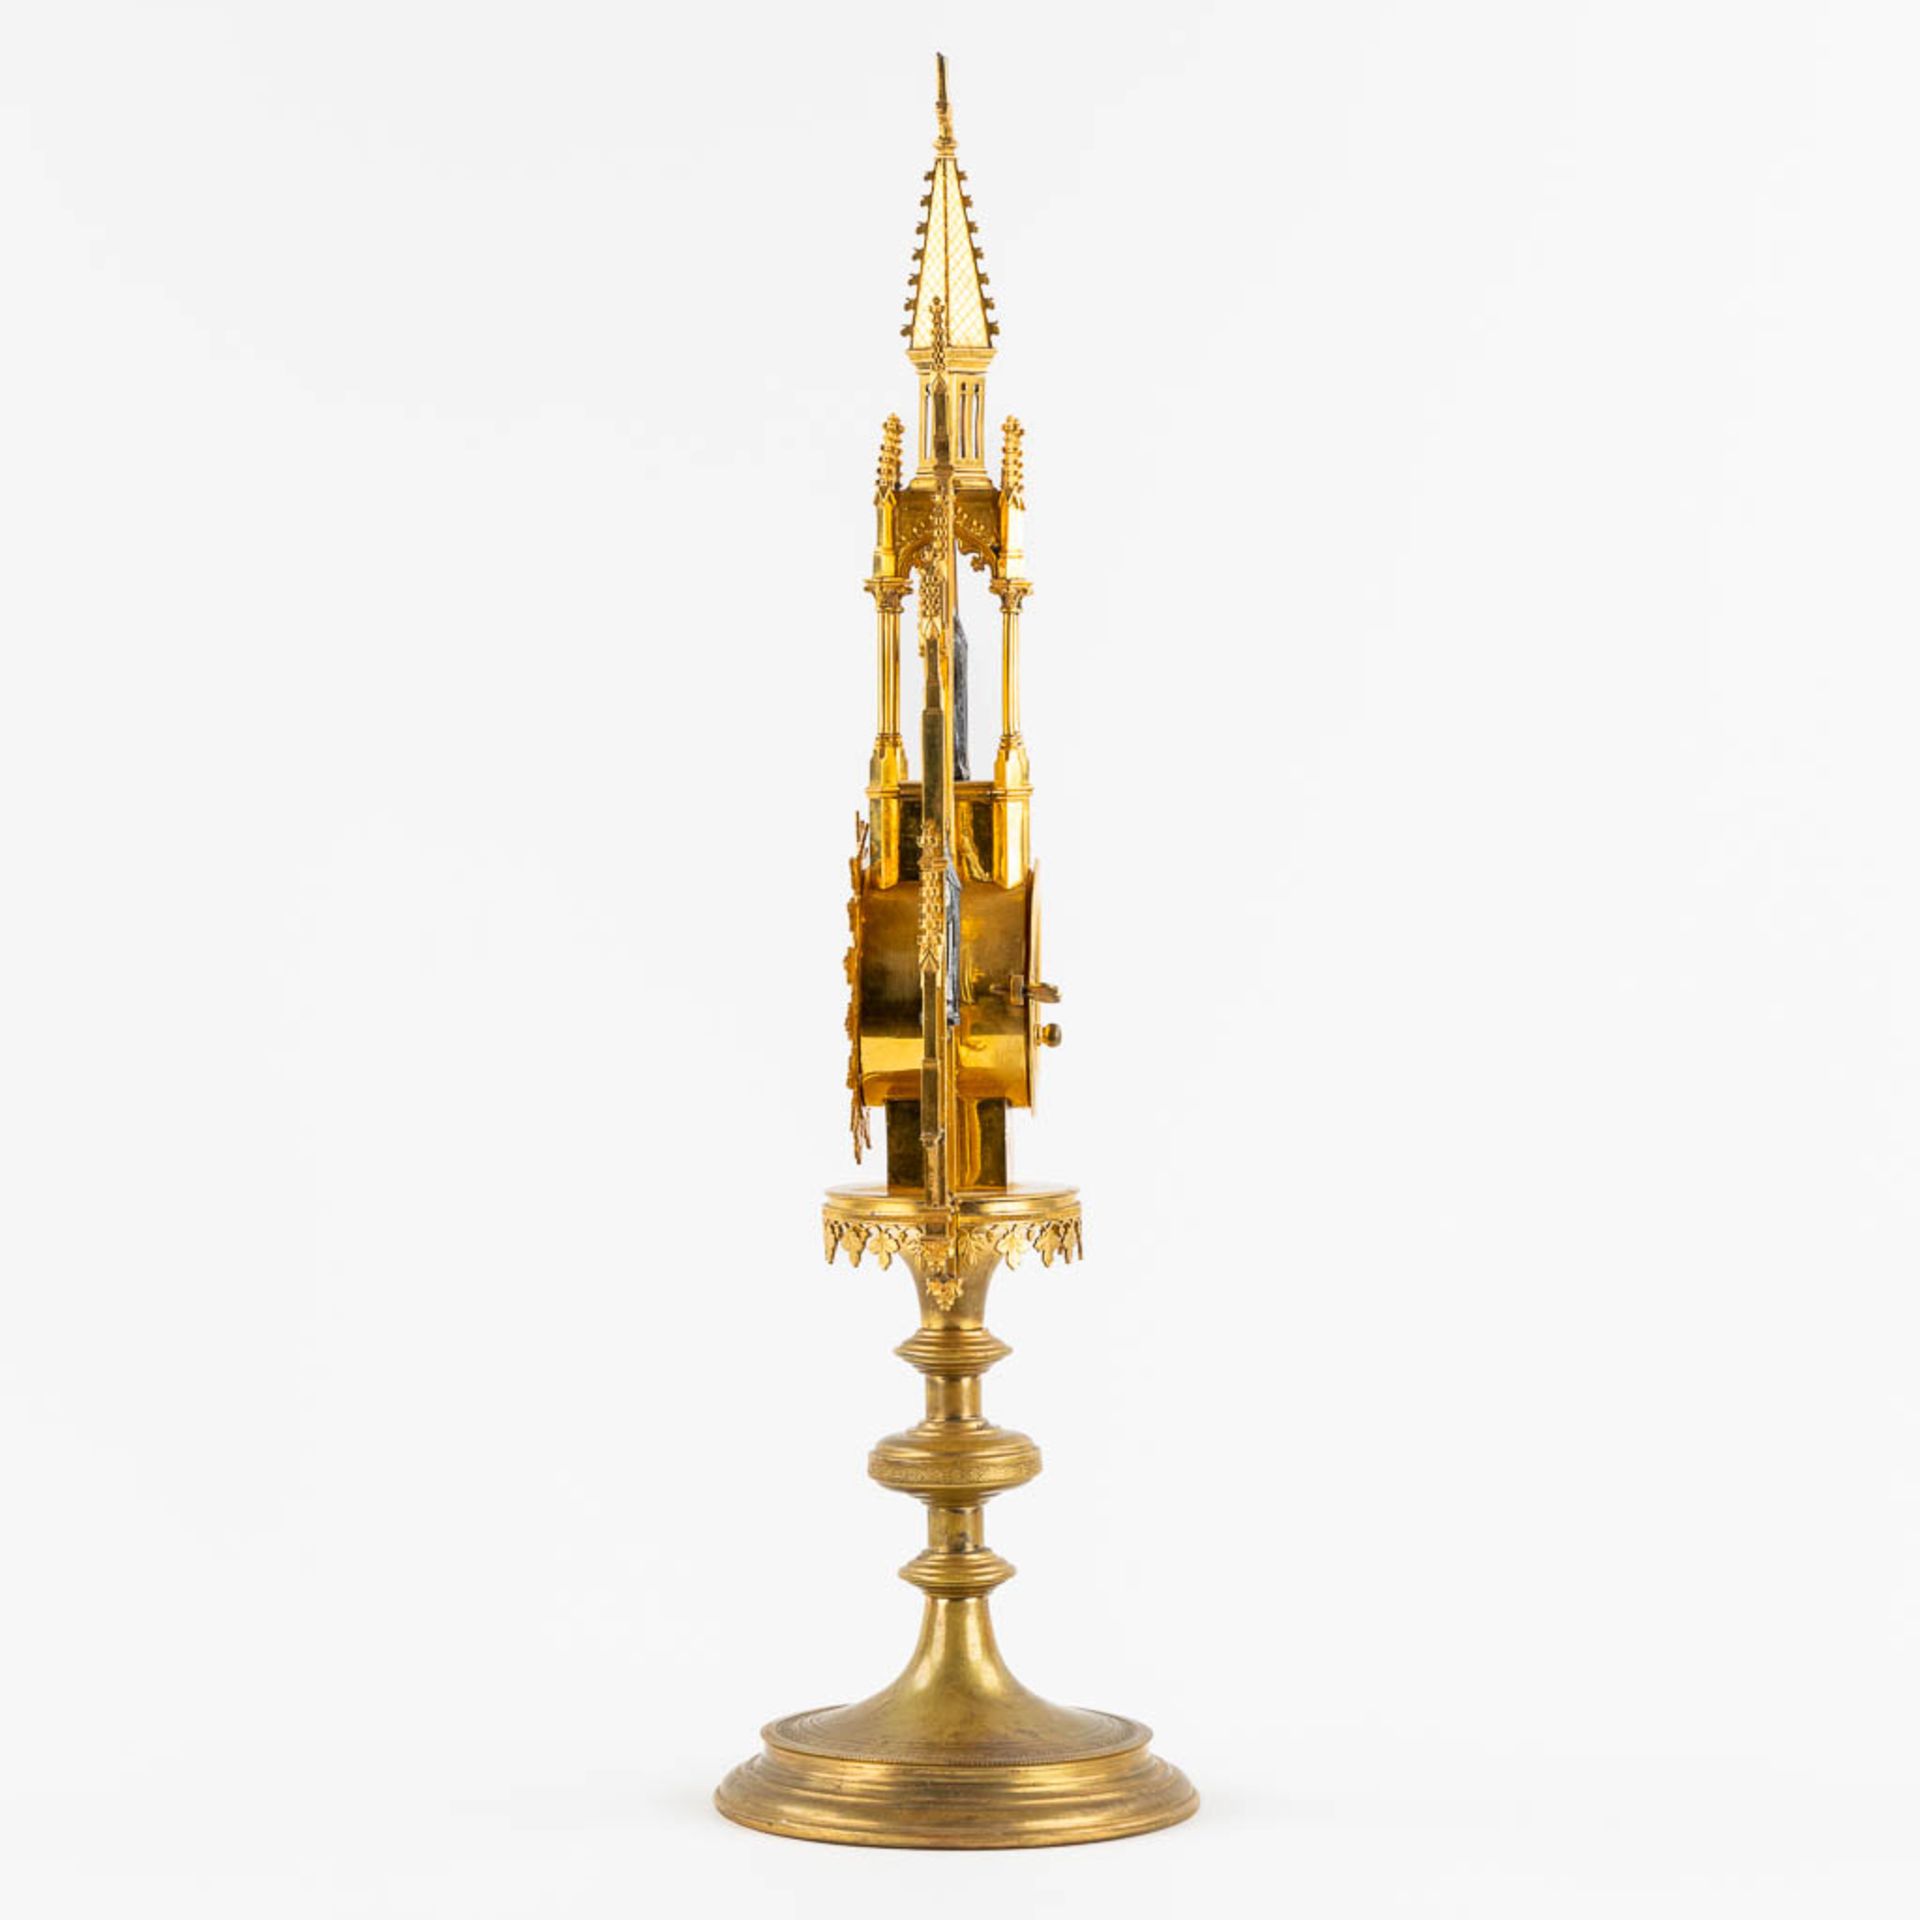 A Tower monstrance, gilt and silver plated brass, Gothic Revival. 19th C. (W:21,5 x H:58 cm) - Image 12 of 22